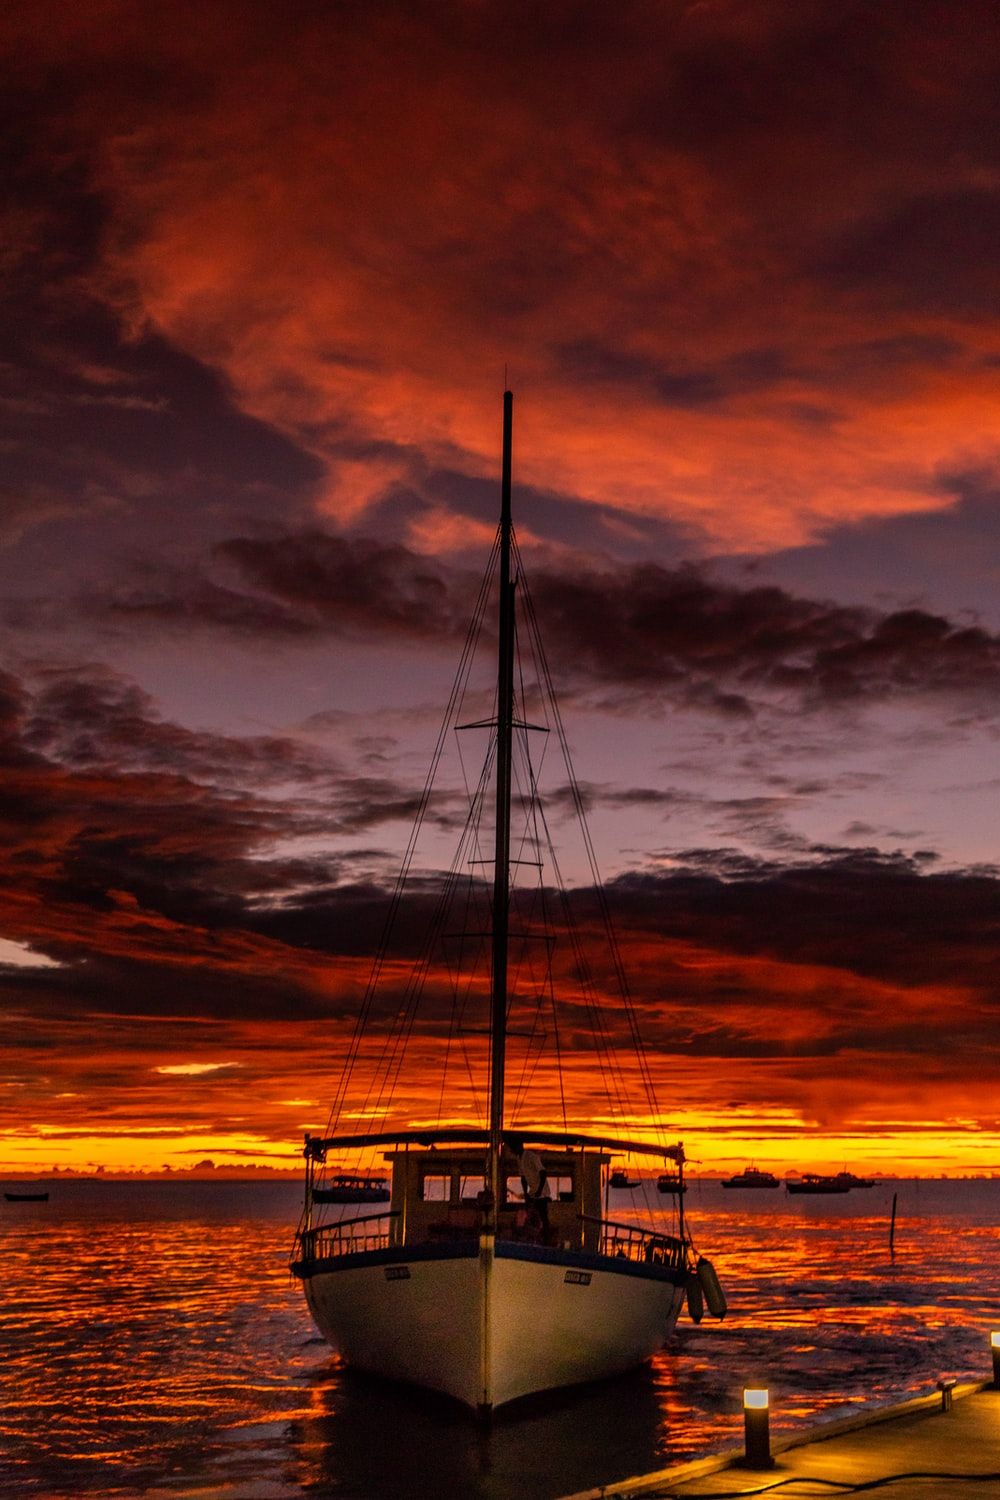 Boat Sunset Picture. Download Free Image